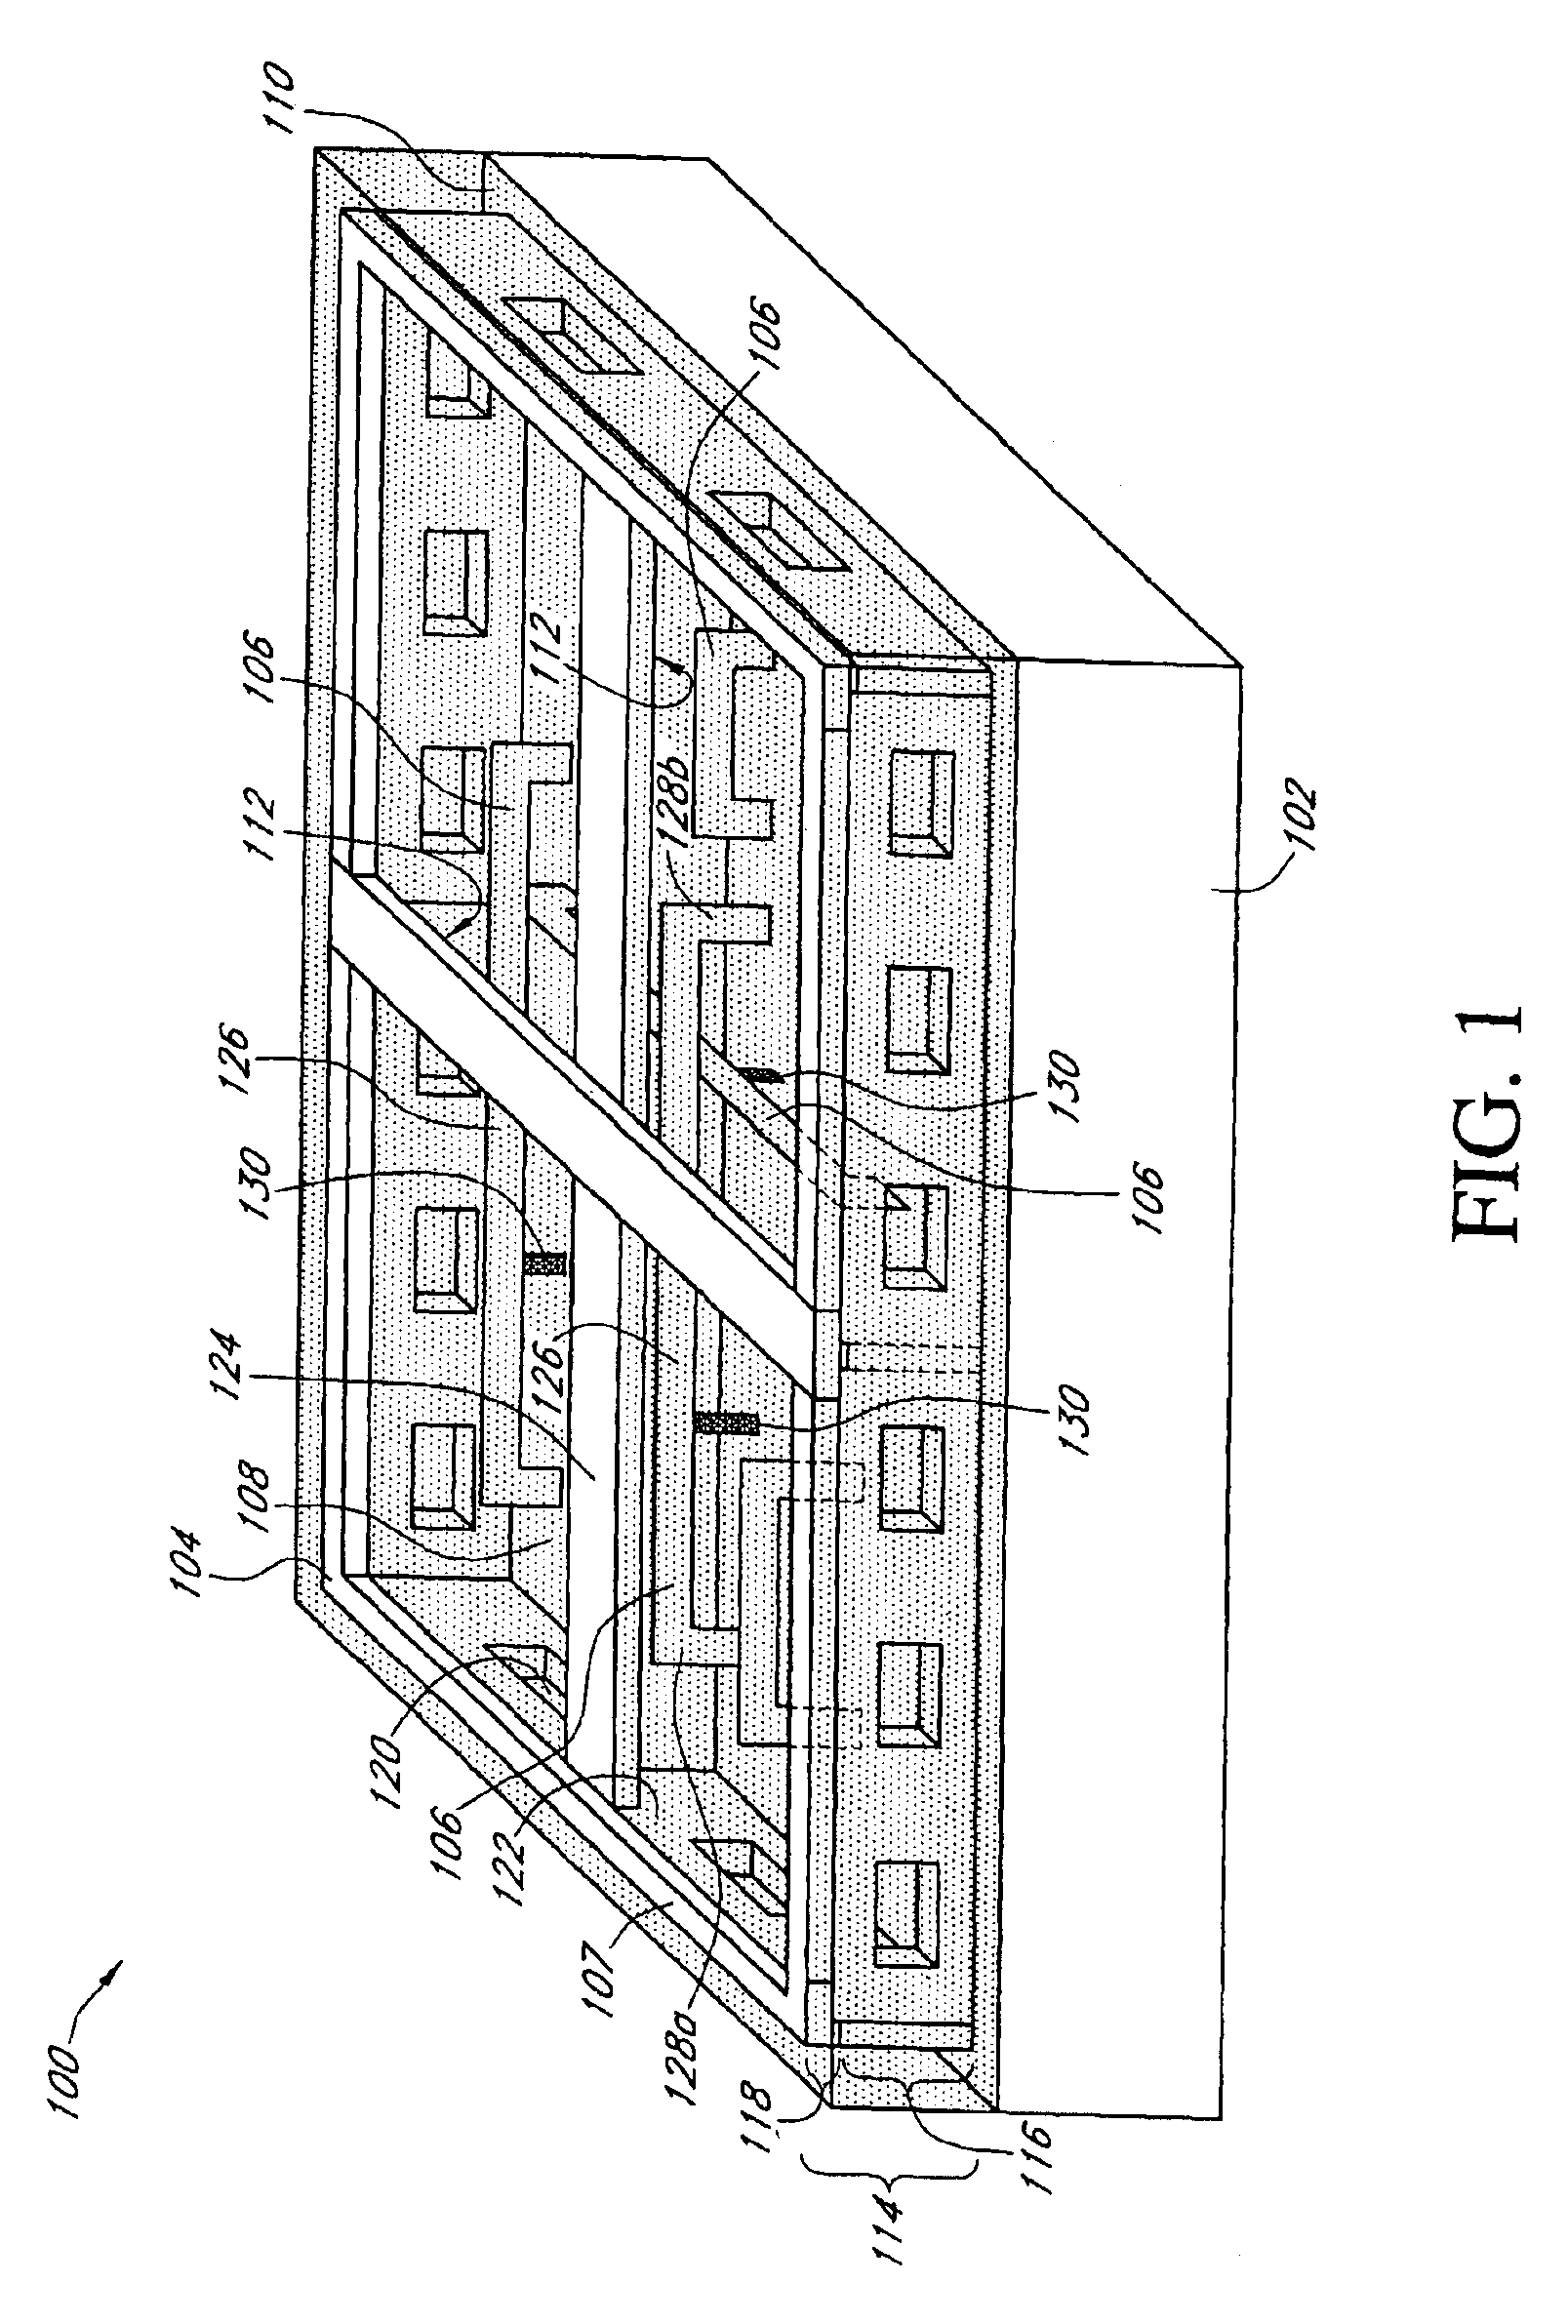 Multiple chip stack structure and cooling system